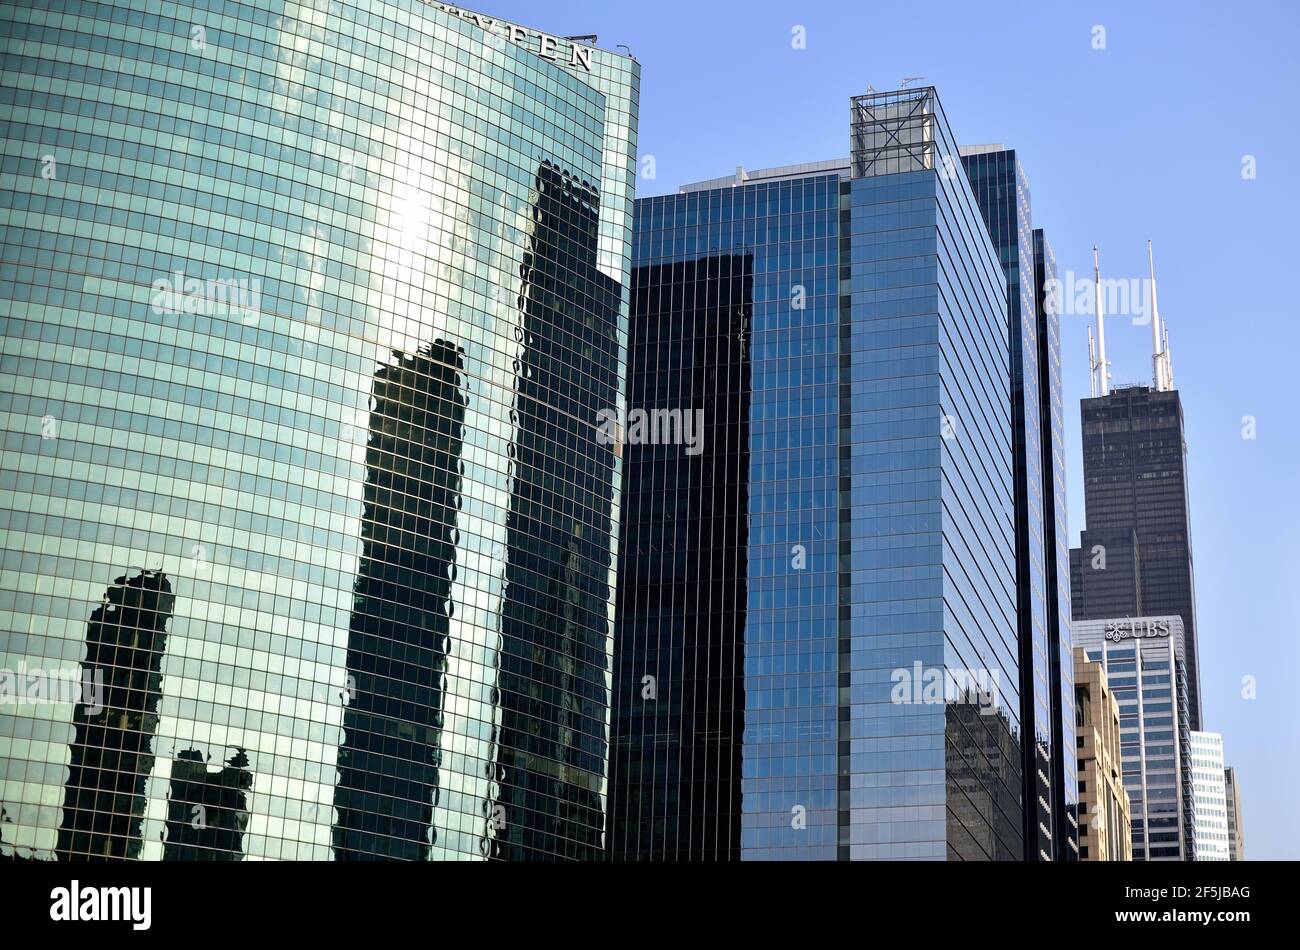 Chicago Illinois Steel And Shaded Glass Buildings Provide A Contrast With Chicagos Tallest Building Black Hued Willis Tower 2F5JBAG 